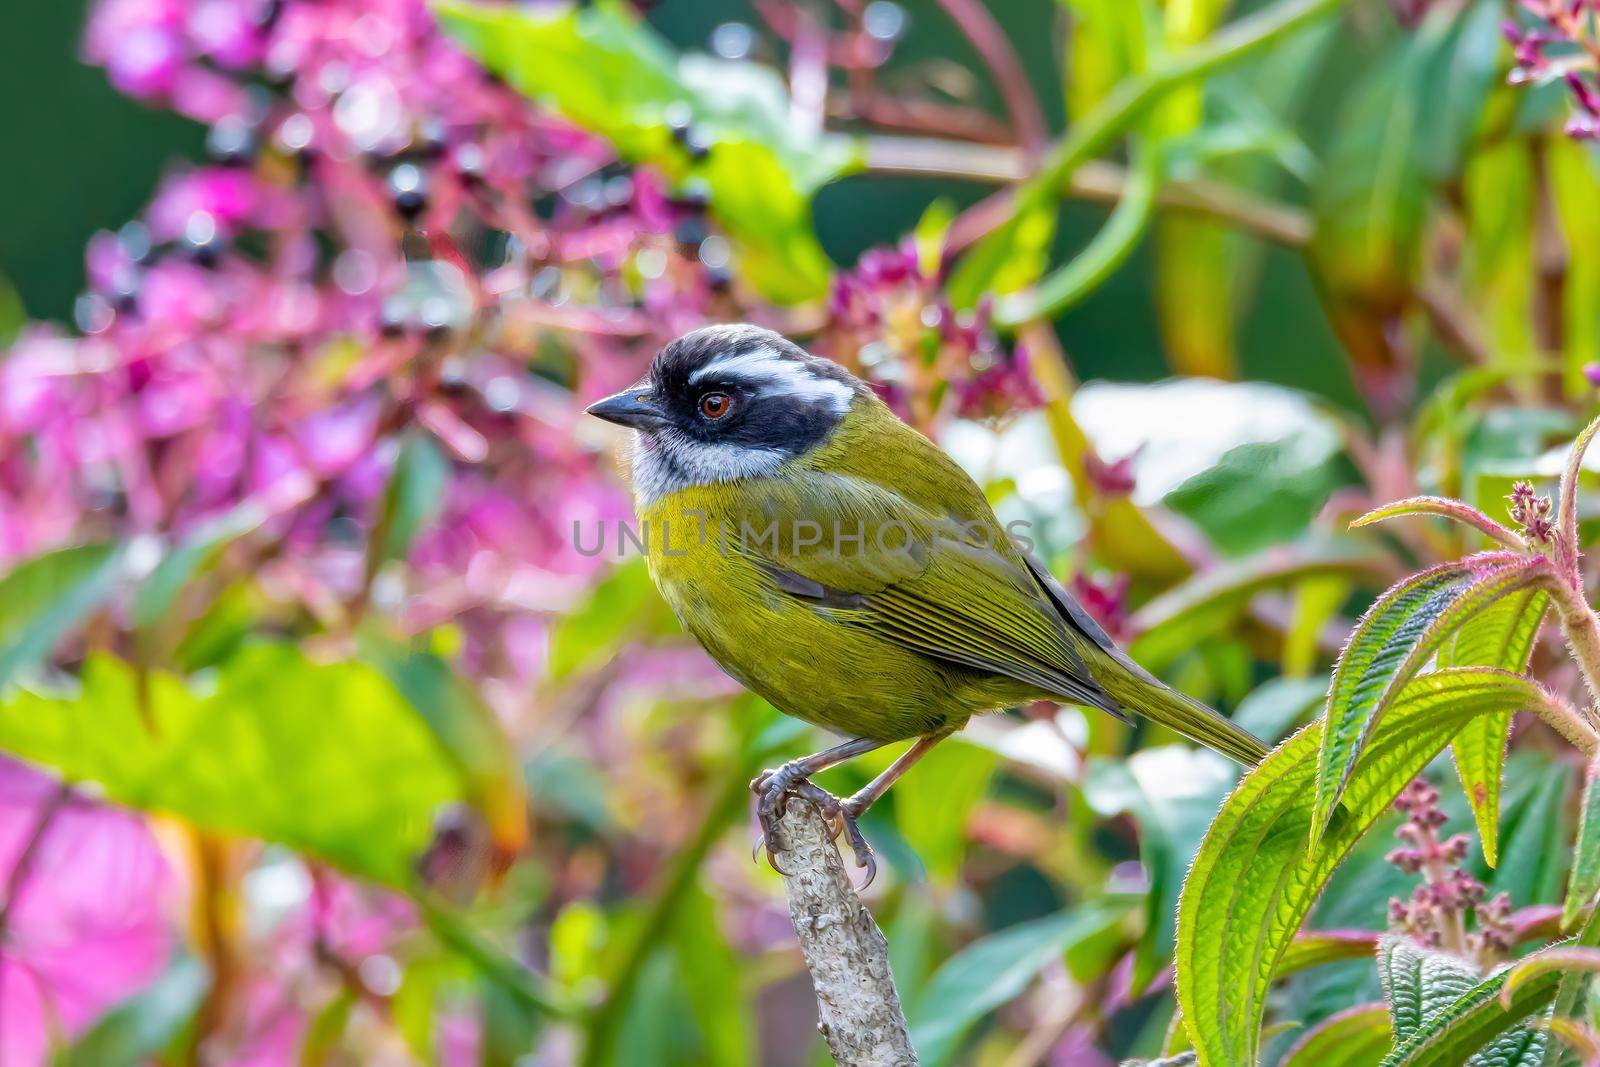 Sooty-capped bush tanager (Chlorospingus pileatus) perched on branch in the rainforests. San Gerardo de Dota, Wildlife and birdwatching in Costa Rica.